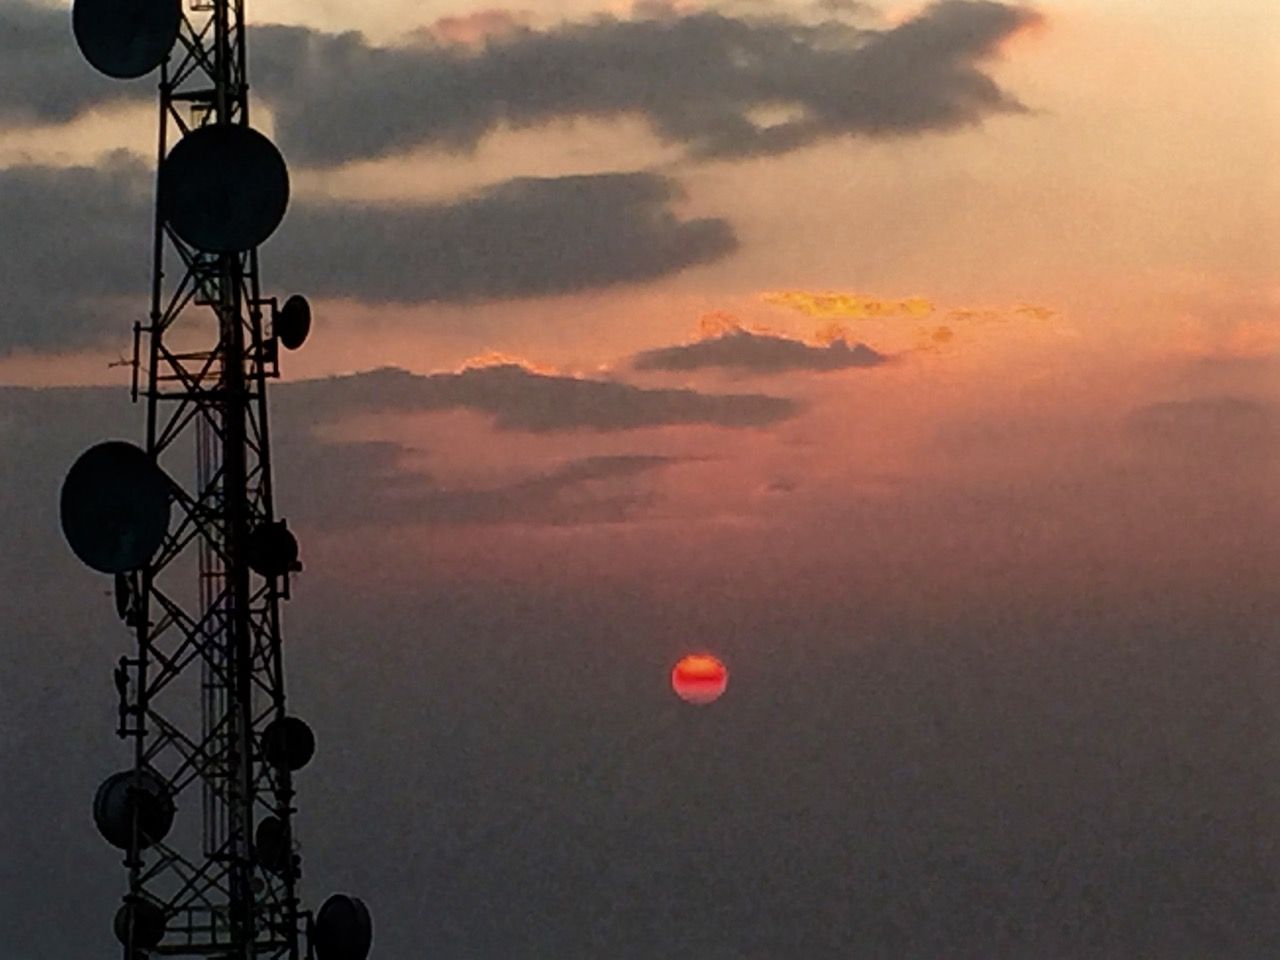 Bright red sun next to a TV tower.